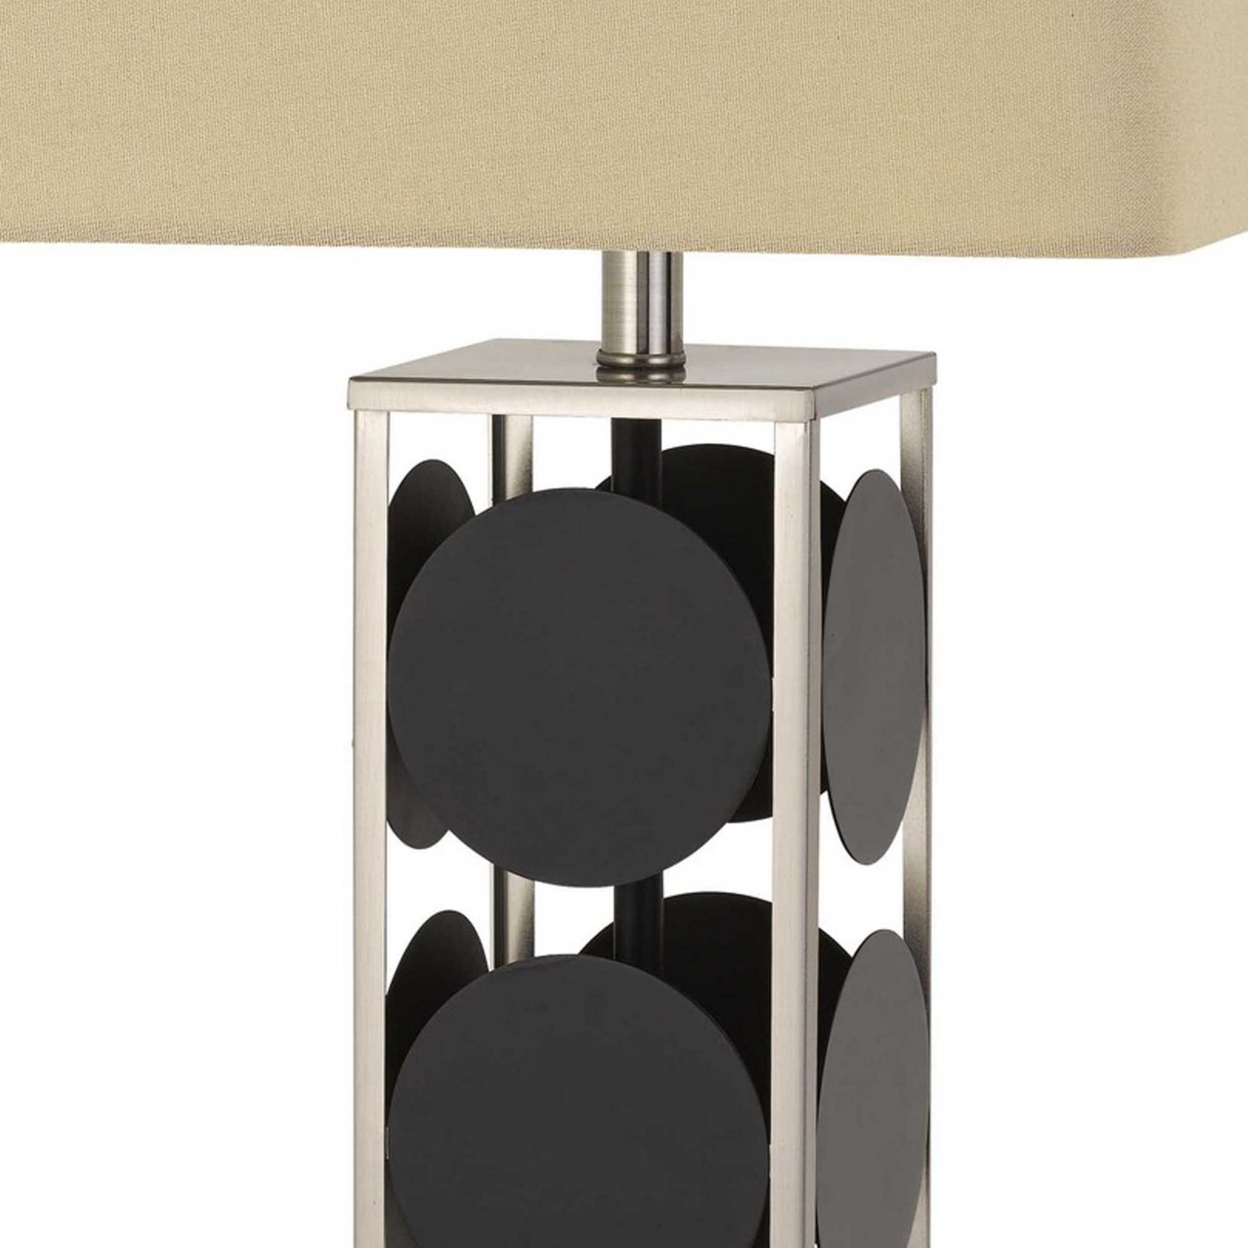 31.5 Metal Table Lamp With Geometric Accents, Black And Silver- Saltoro Sherpi